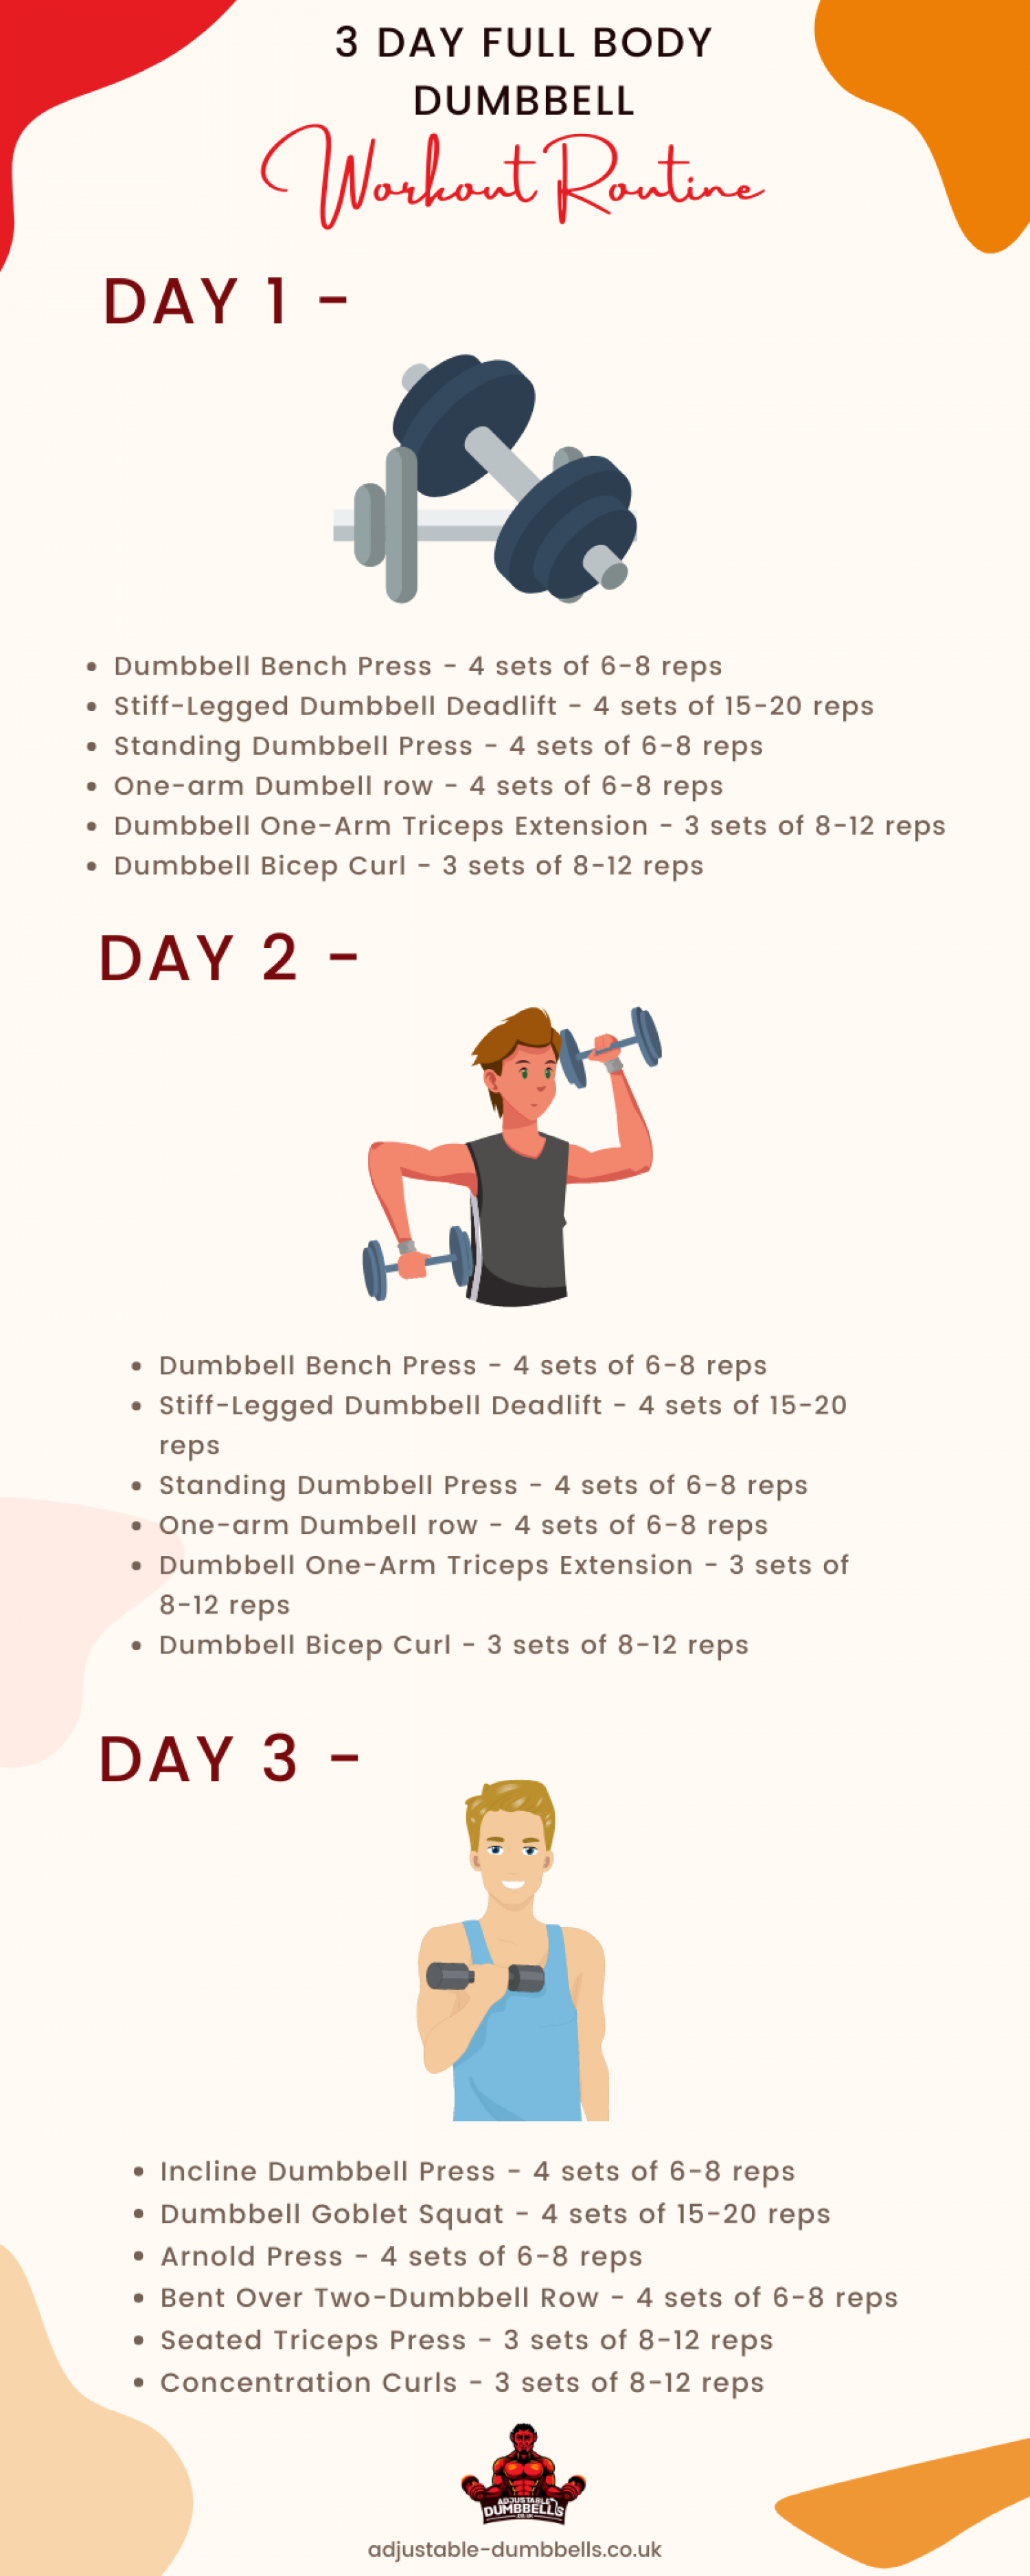 3 Day Full Body Dumbbell Workout Routine Infographic